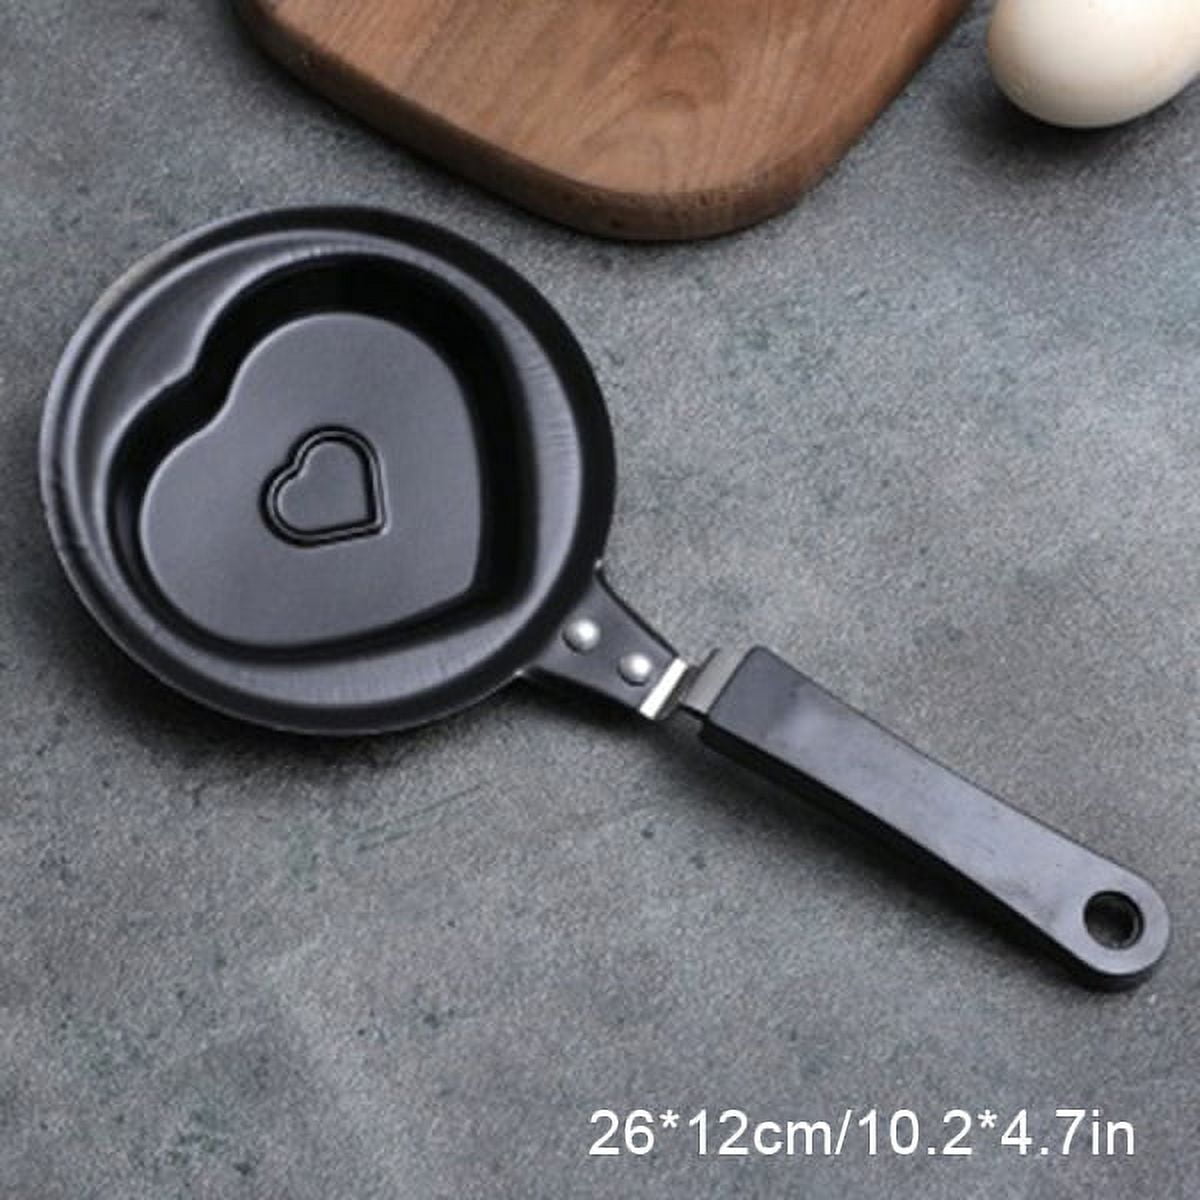 NINGVIHE Egg Pan,Nonstick Egg Frying Pan,Skillet Pans for Cooking,Multi Egg  Cooker Pan for Breakfast,Hearts and Circles(Heart)